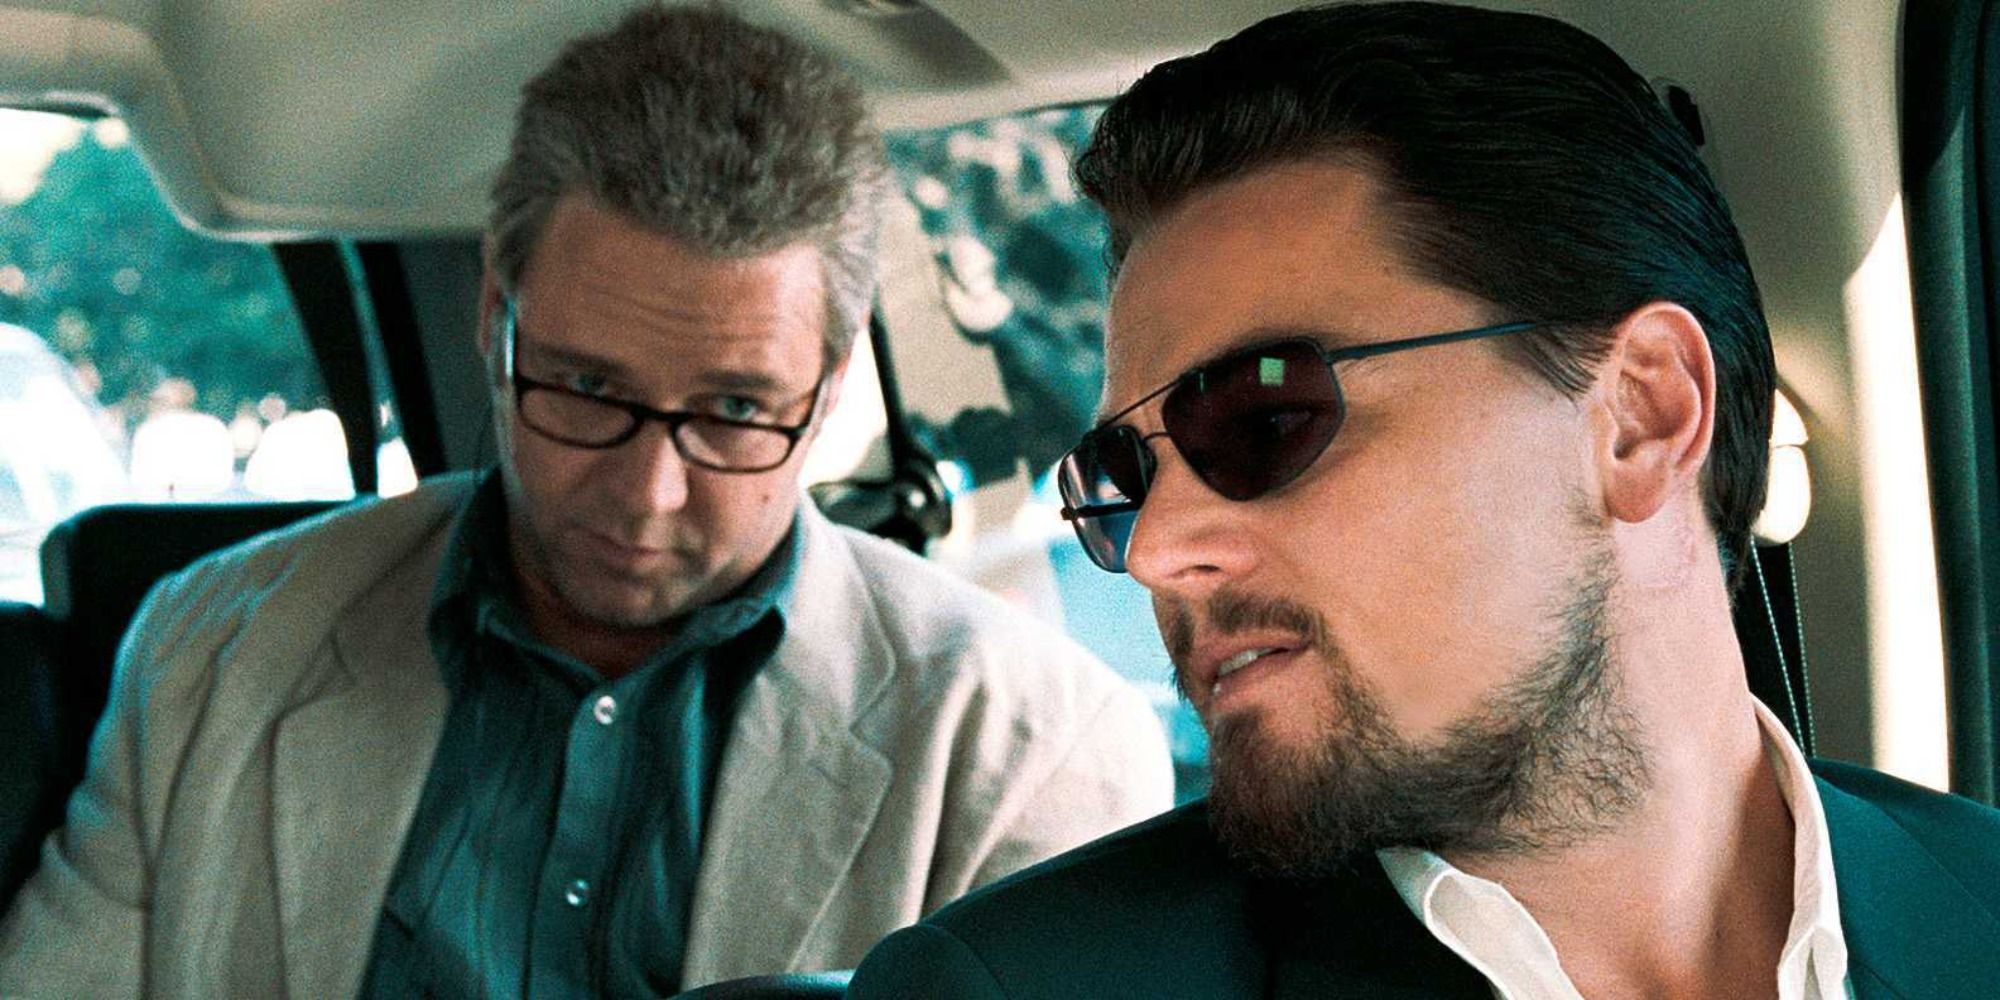 Leonardo DiCaprio leaning back to talk to Russell Crowe behind him in a car in Body of Lies